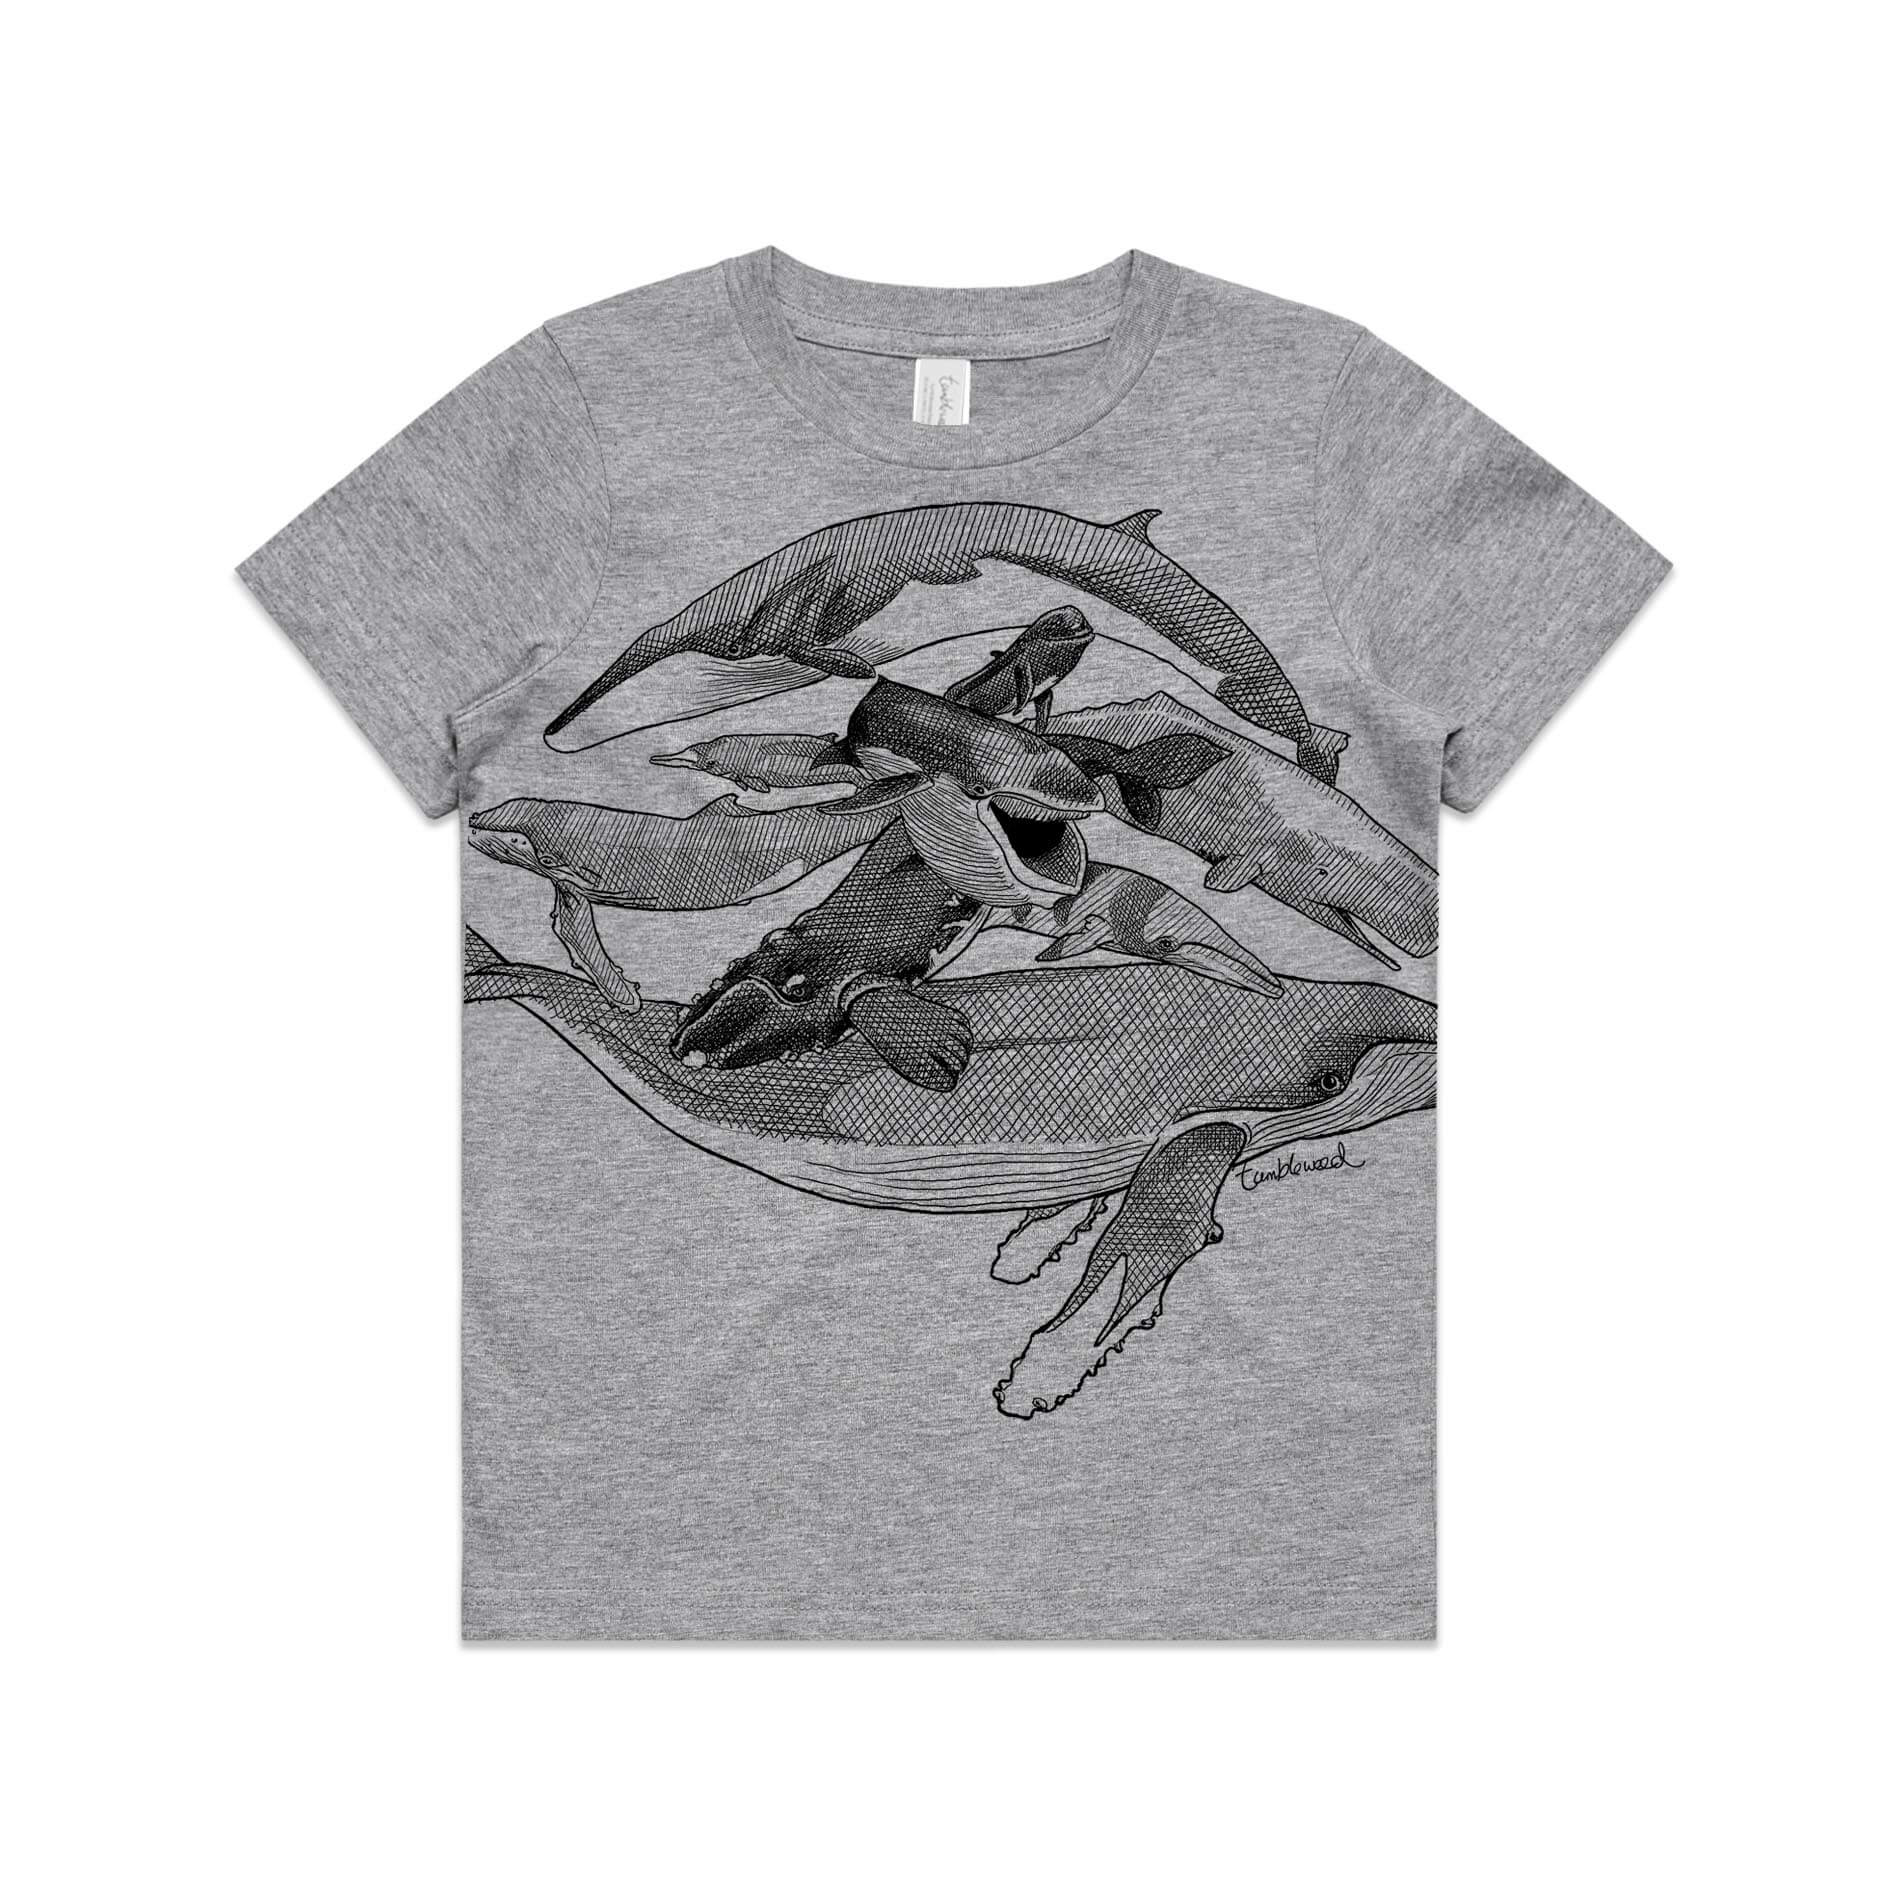 Grey marle, cotton kids' t-shirt with screen printed Kids whales design.